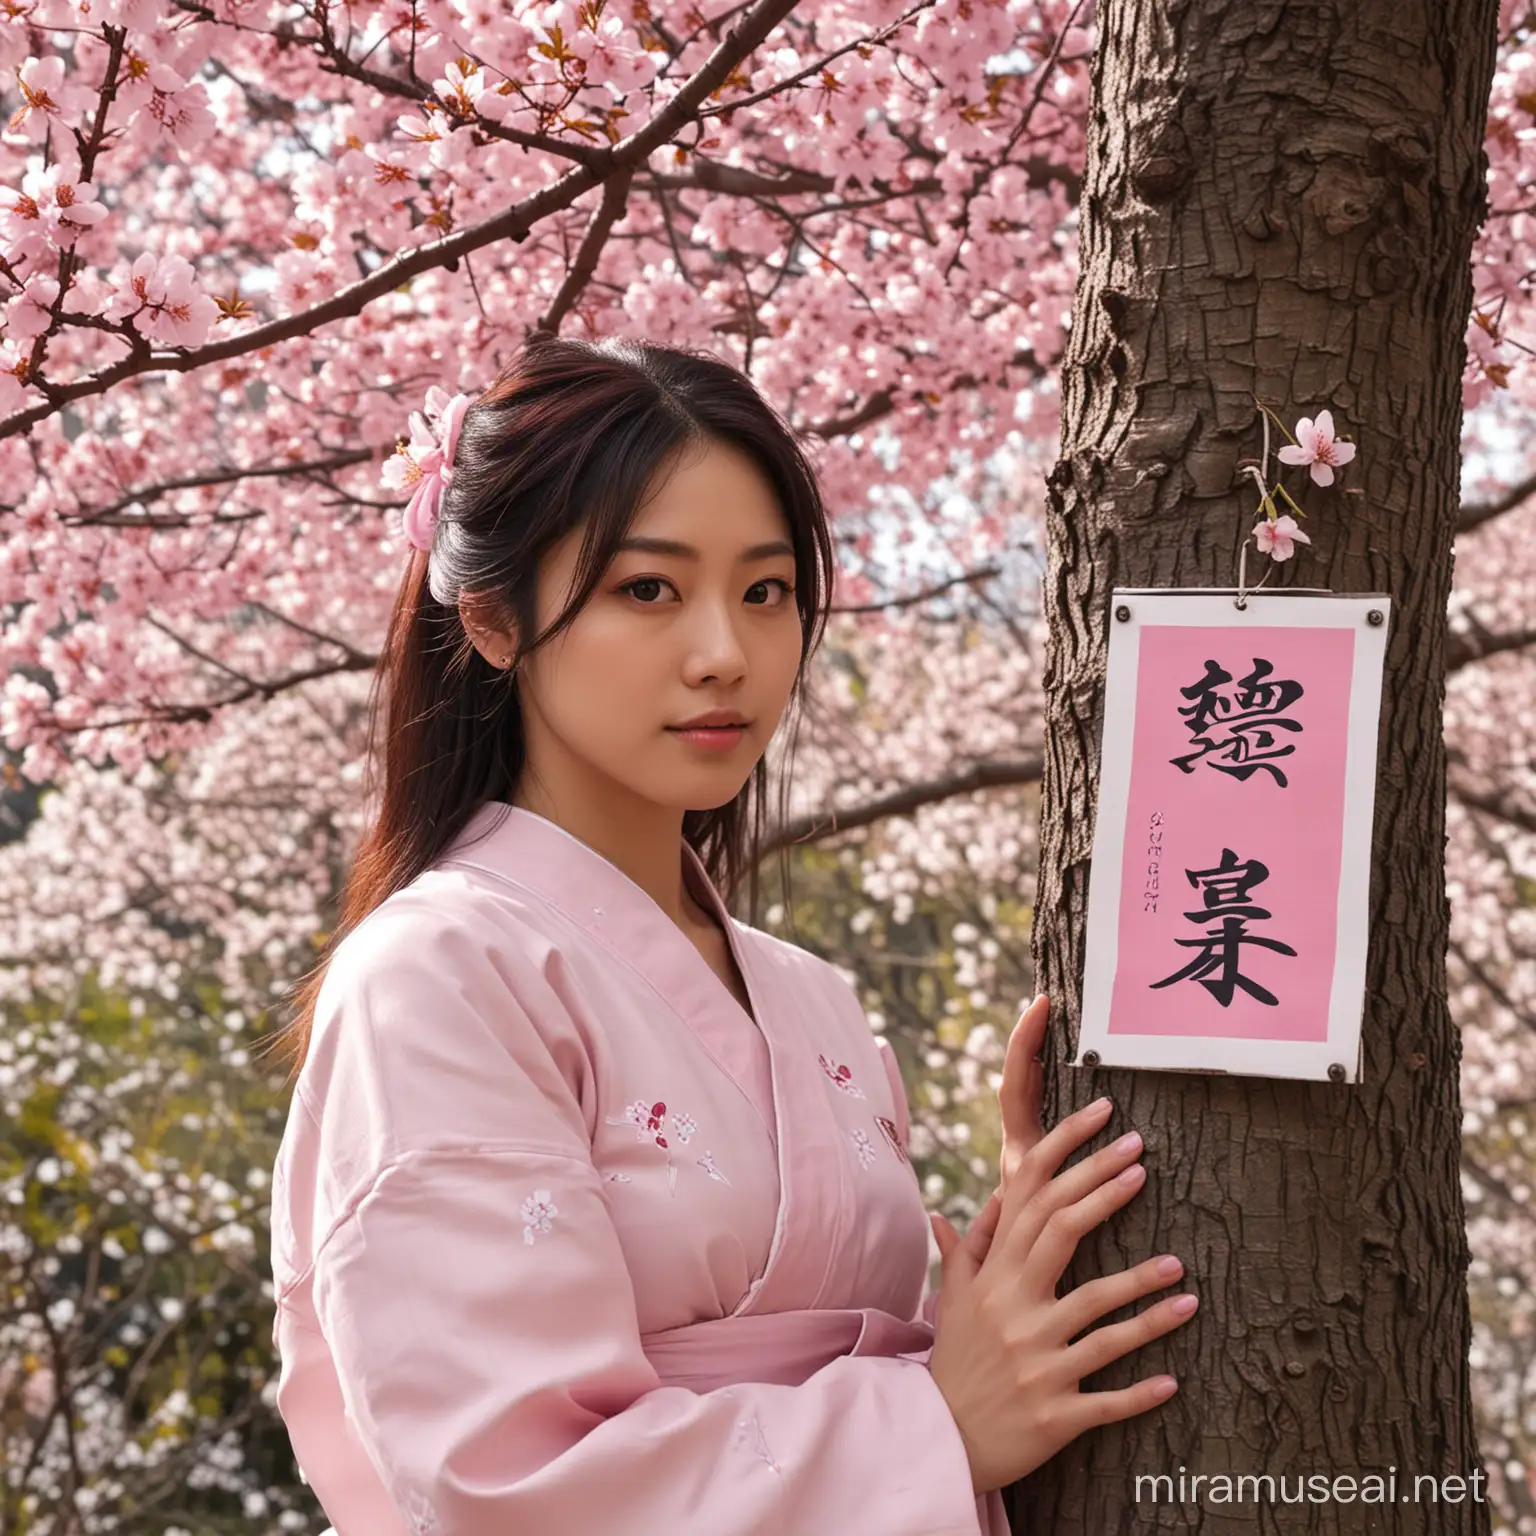 Japanese Cherry Blossom Festival Signs Hanging on Tree with Beautiful Black Woman